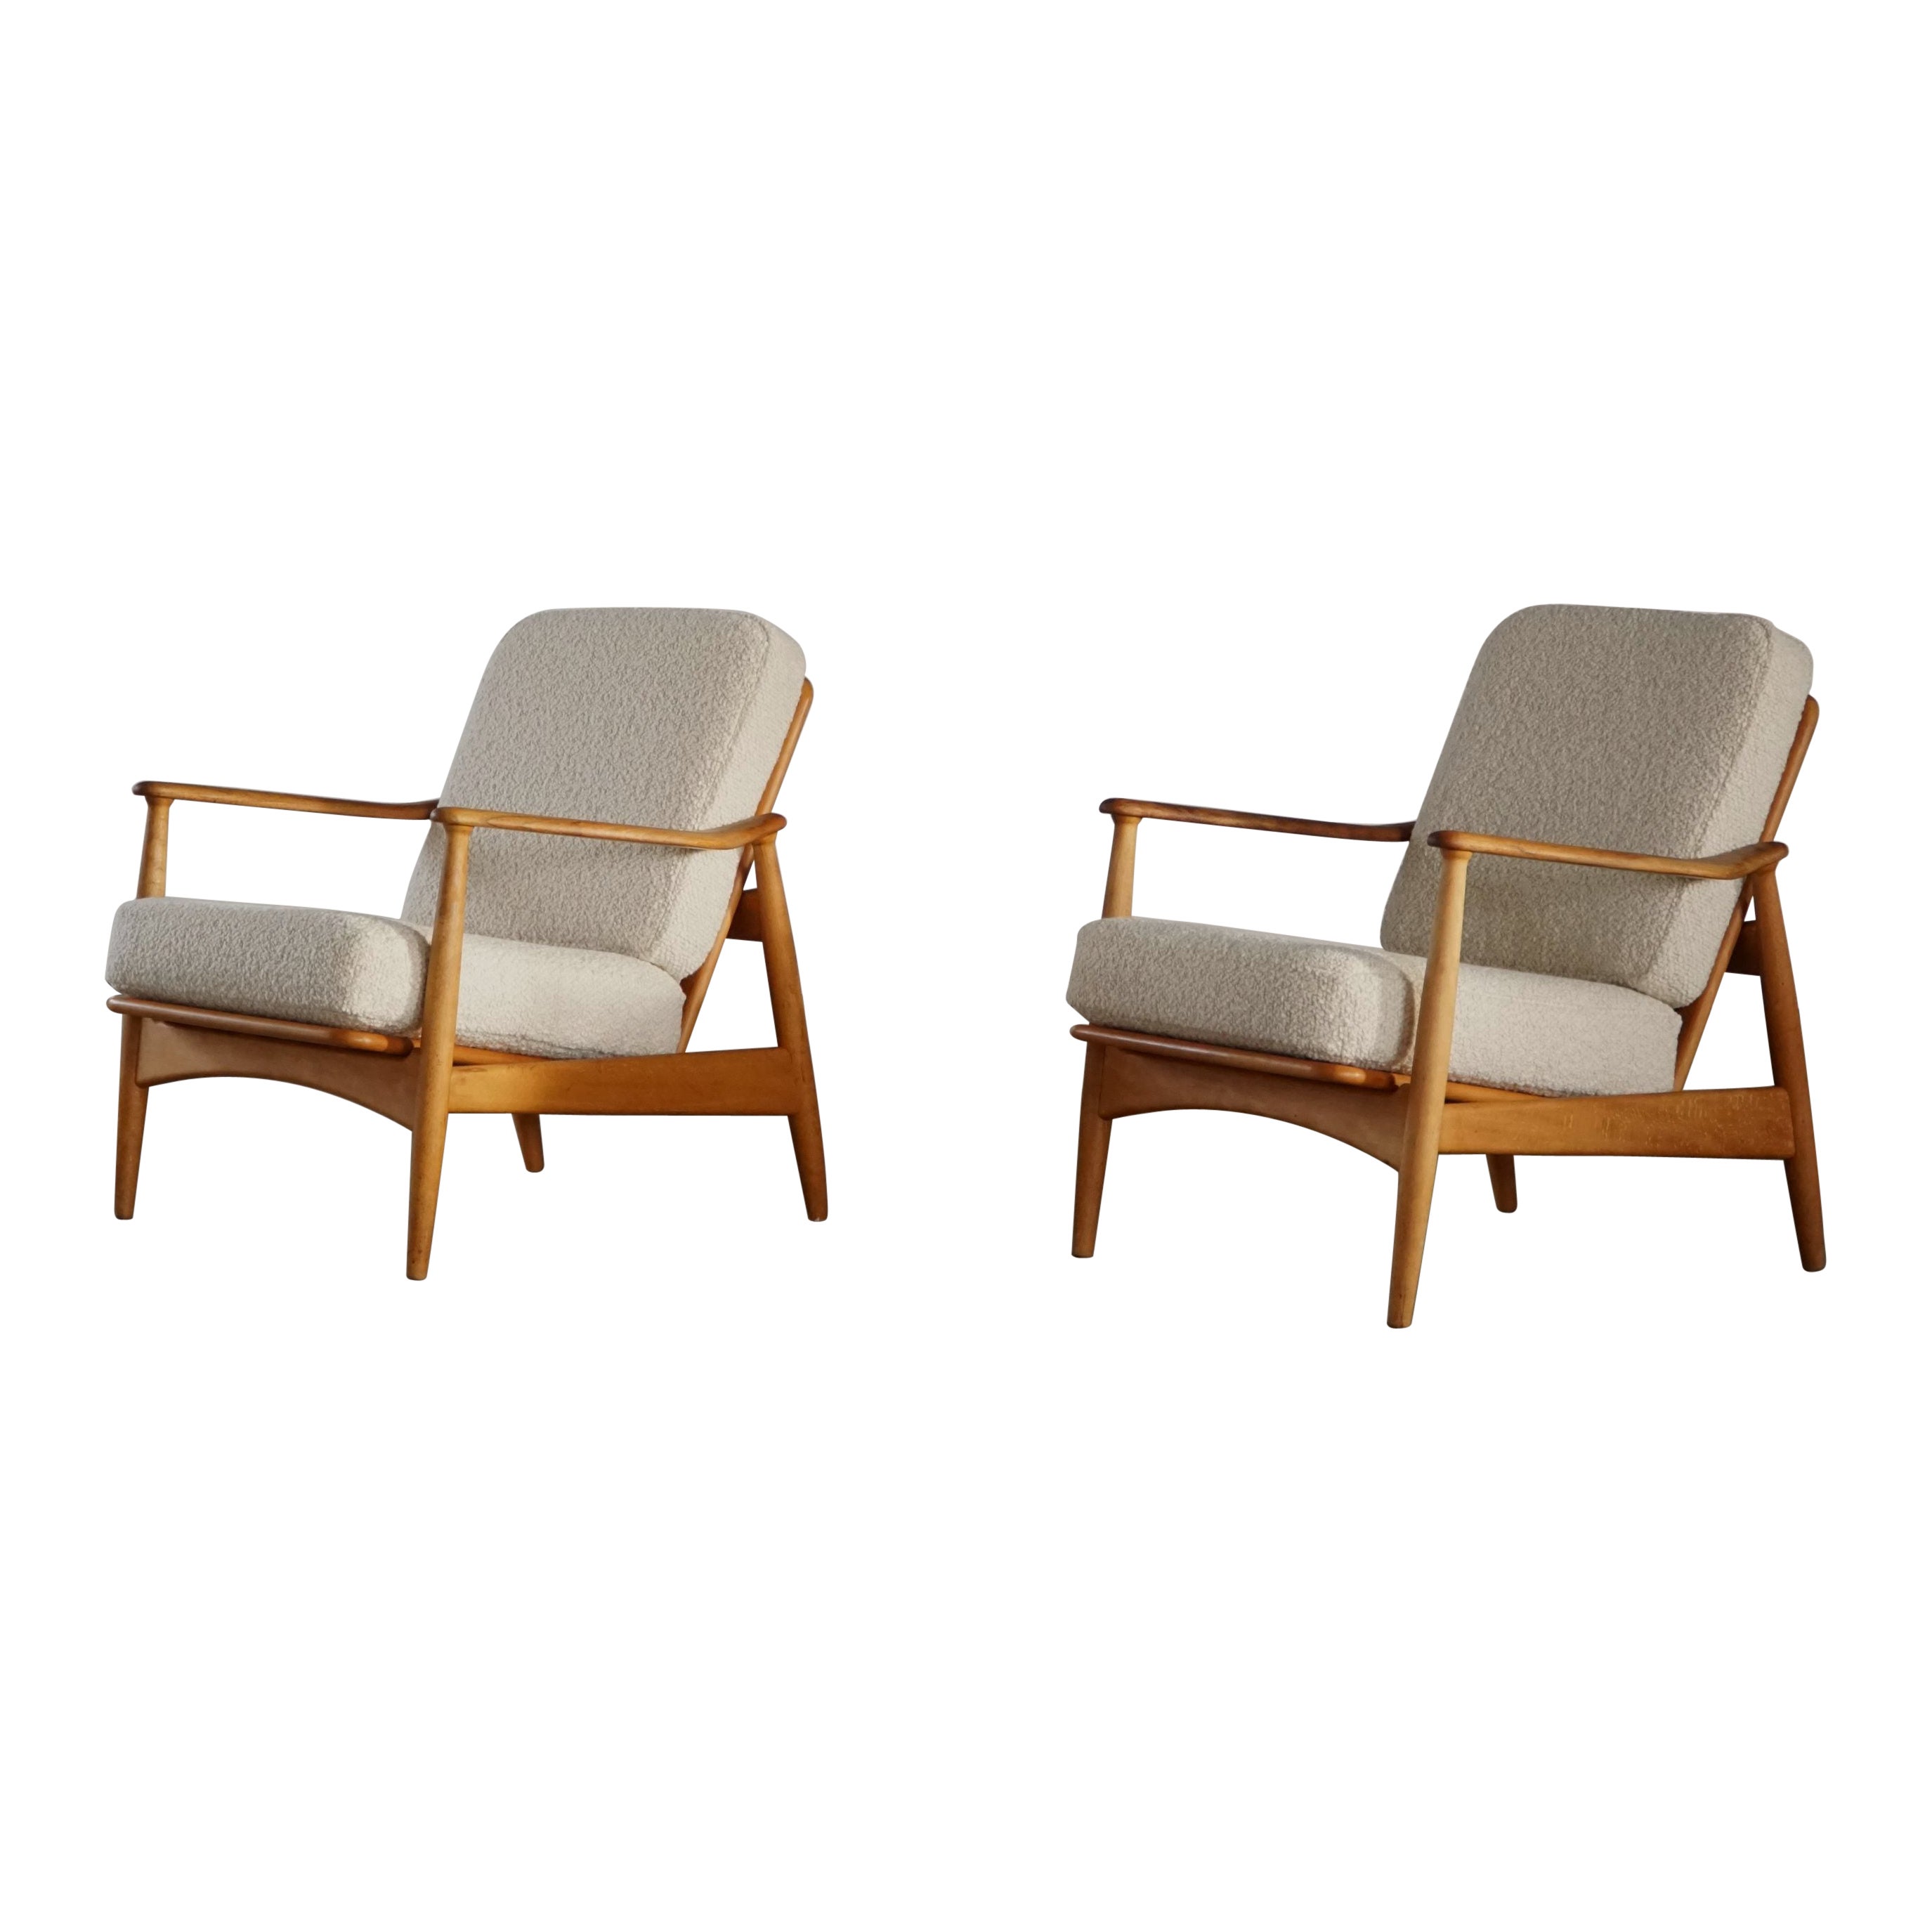 Arne Vodder, Pair of Lounge Chairs, Model FD 161, Reupholstered in Bouclé, 1950s